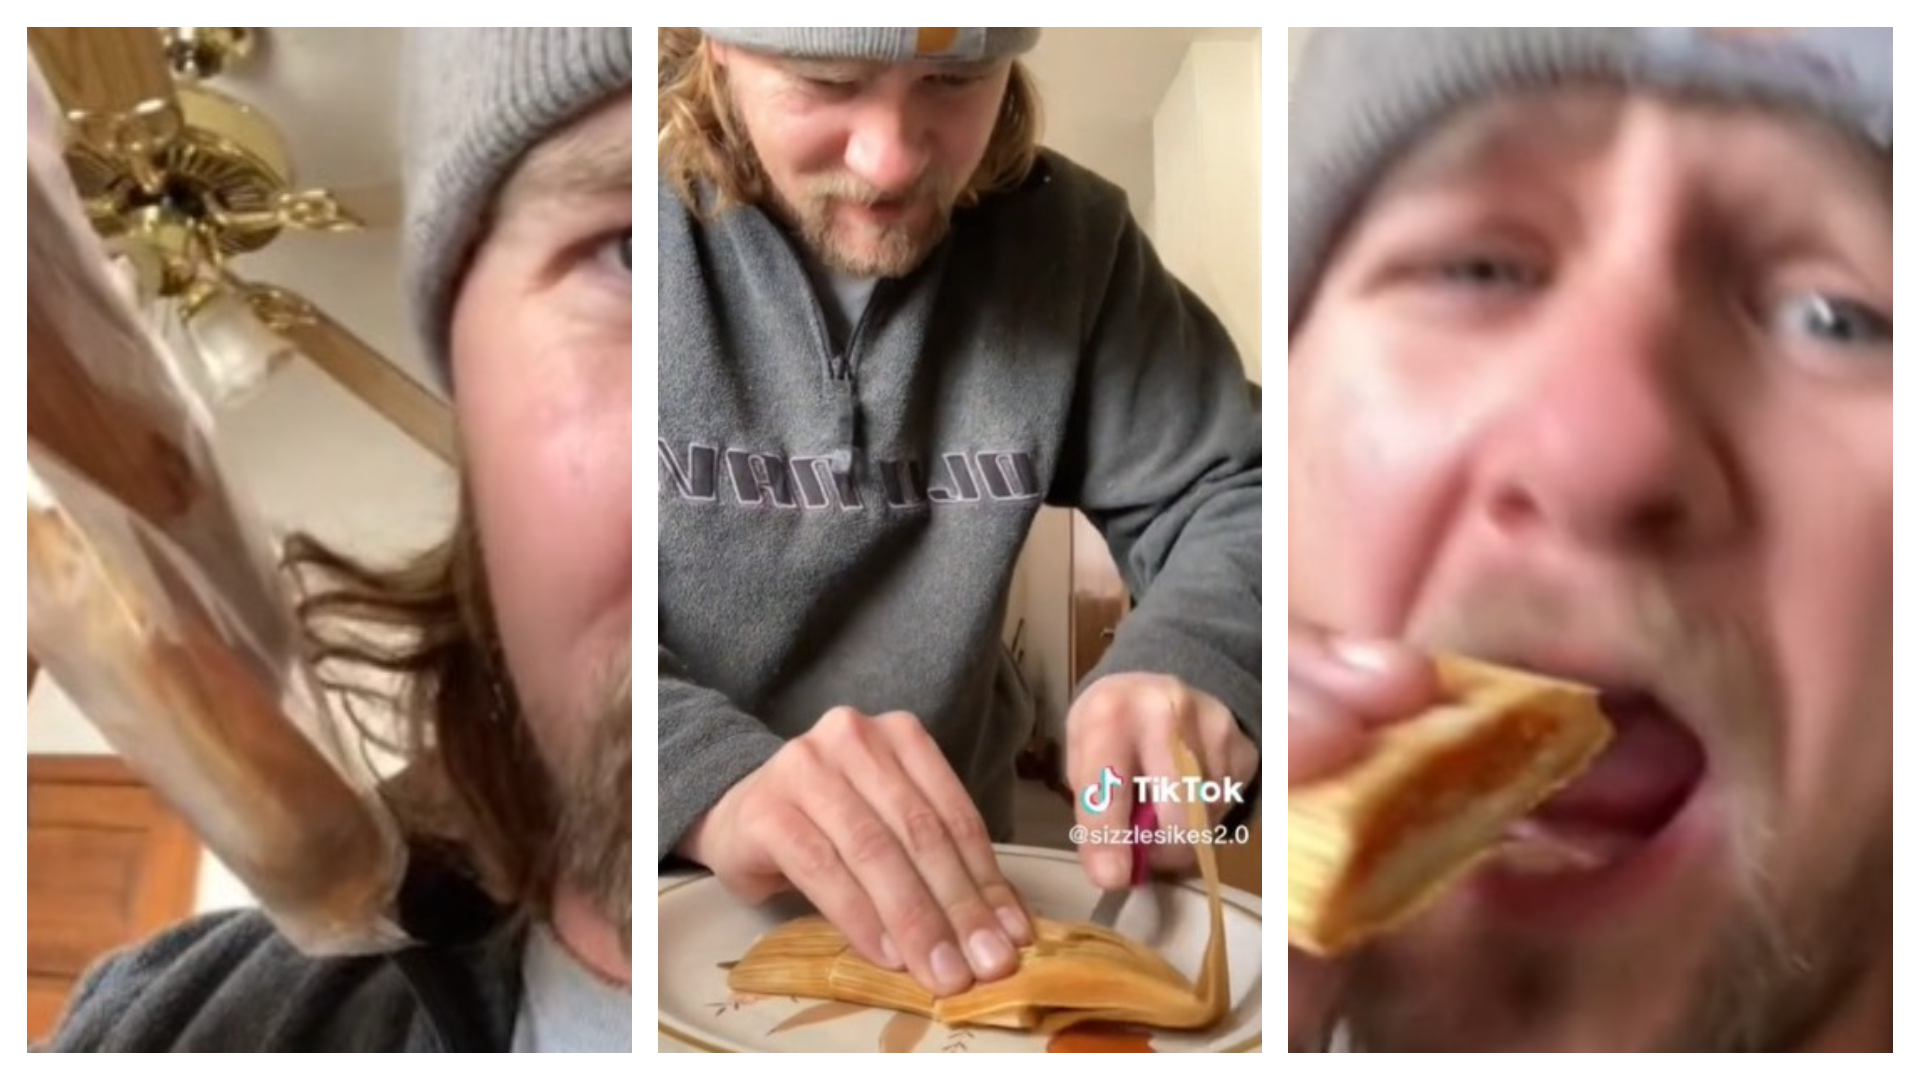 A foreigner went viral for eating a tamale with all its leaves (screenshot: sizzlesikes2.0/Tik Tok)